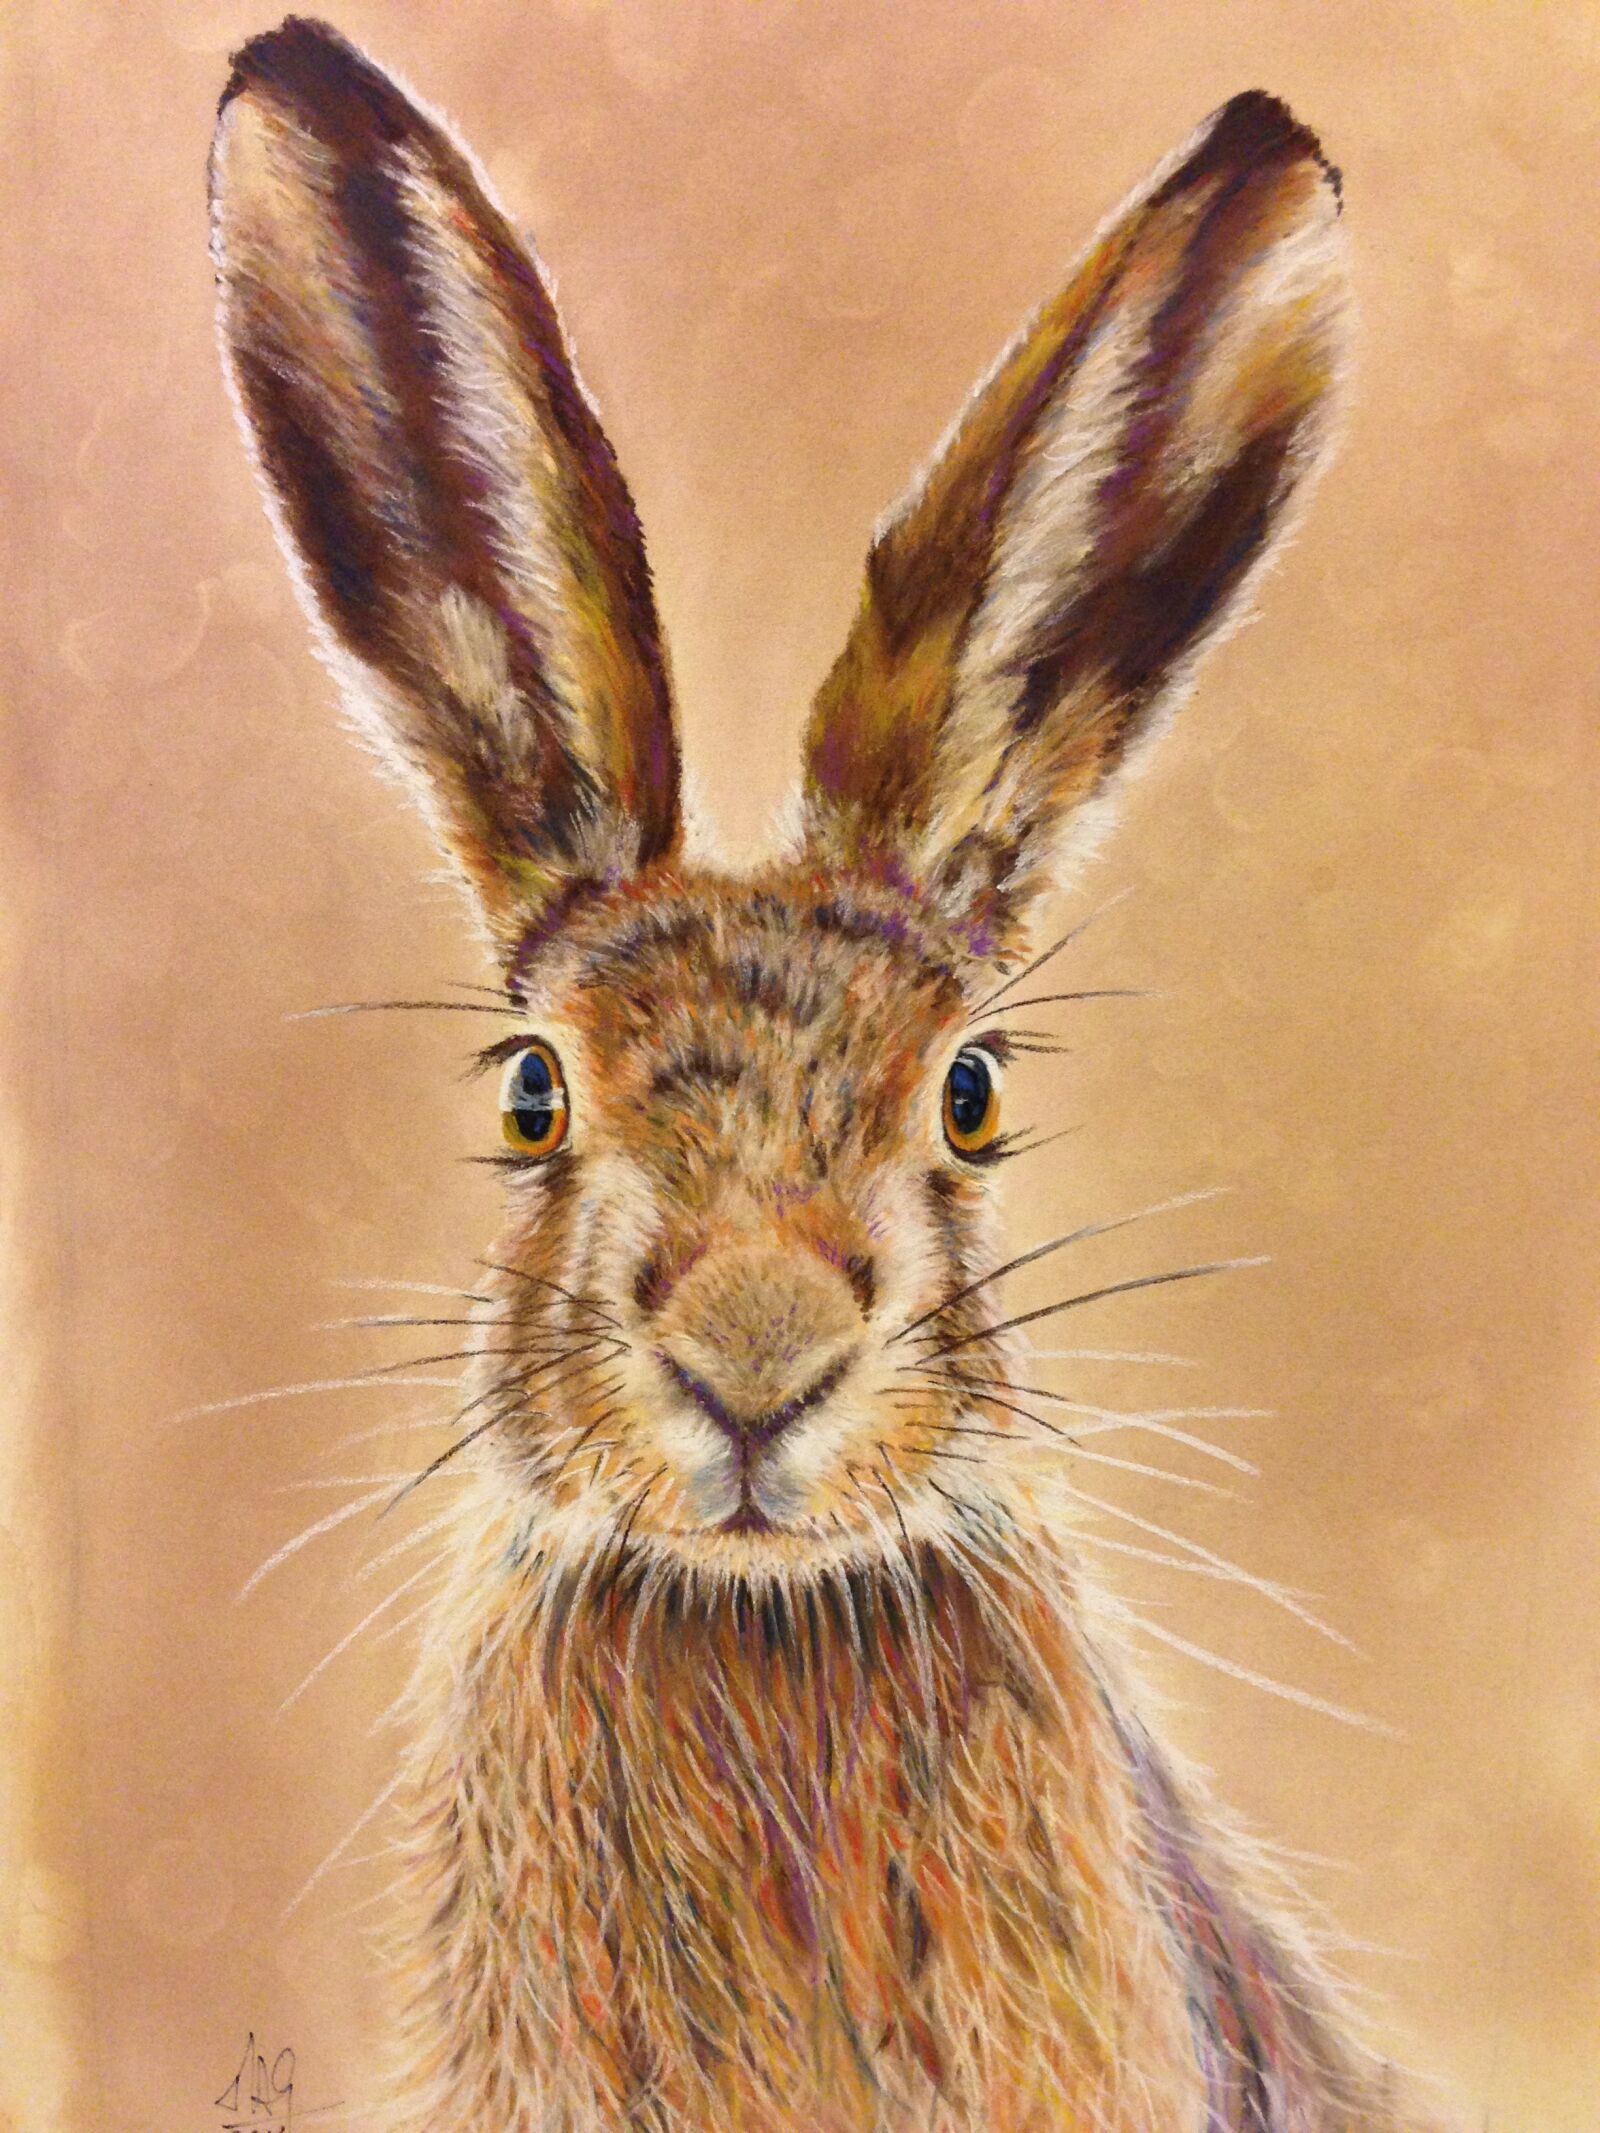 Apple iPhone 5 sample photo. Hare, pastel pencils, artistic photography